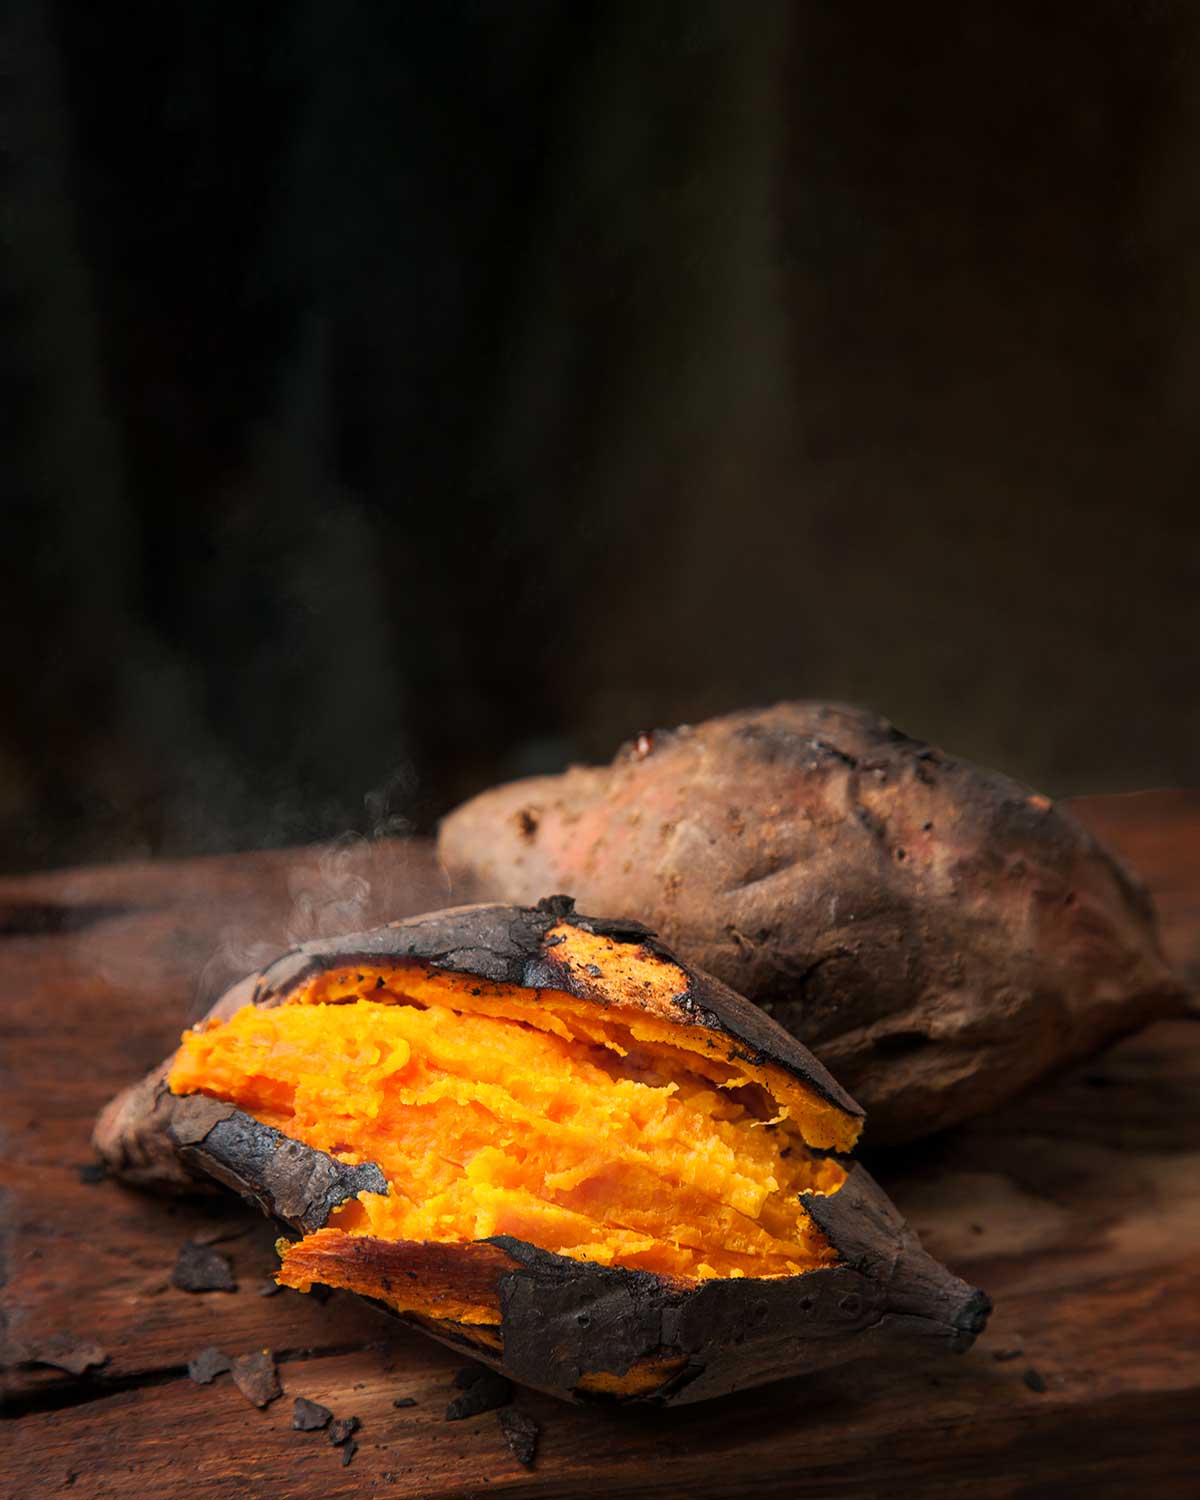 Two roasted sweet potatoes on a wooden table.